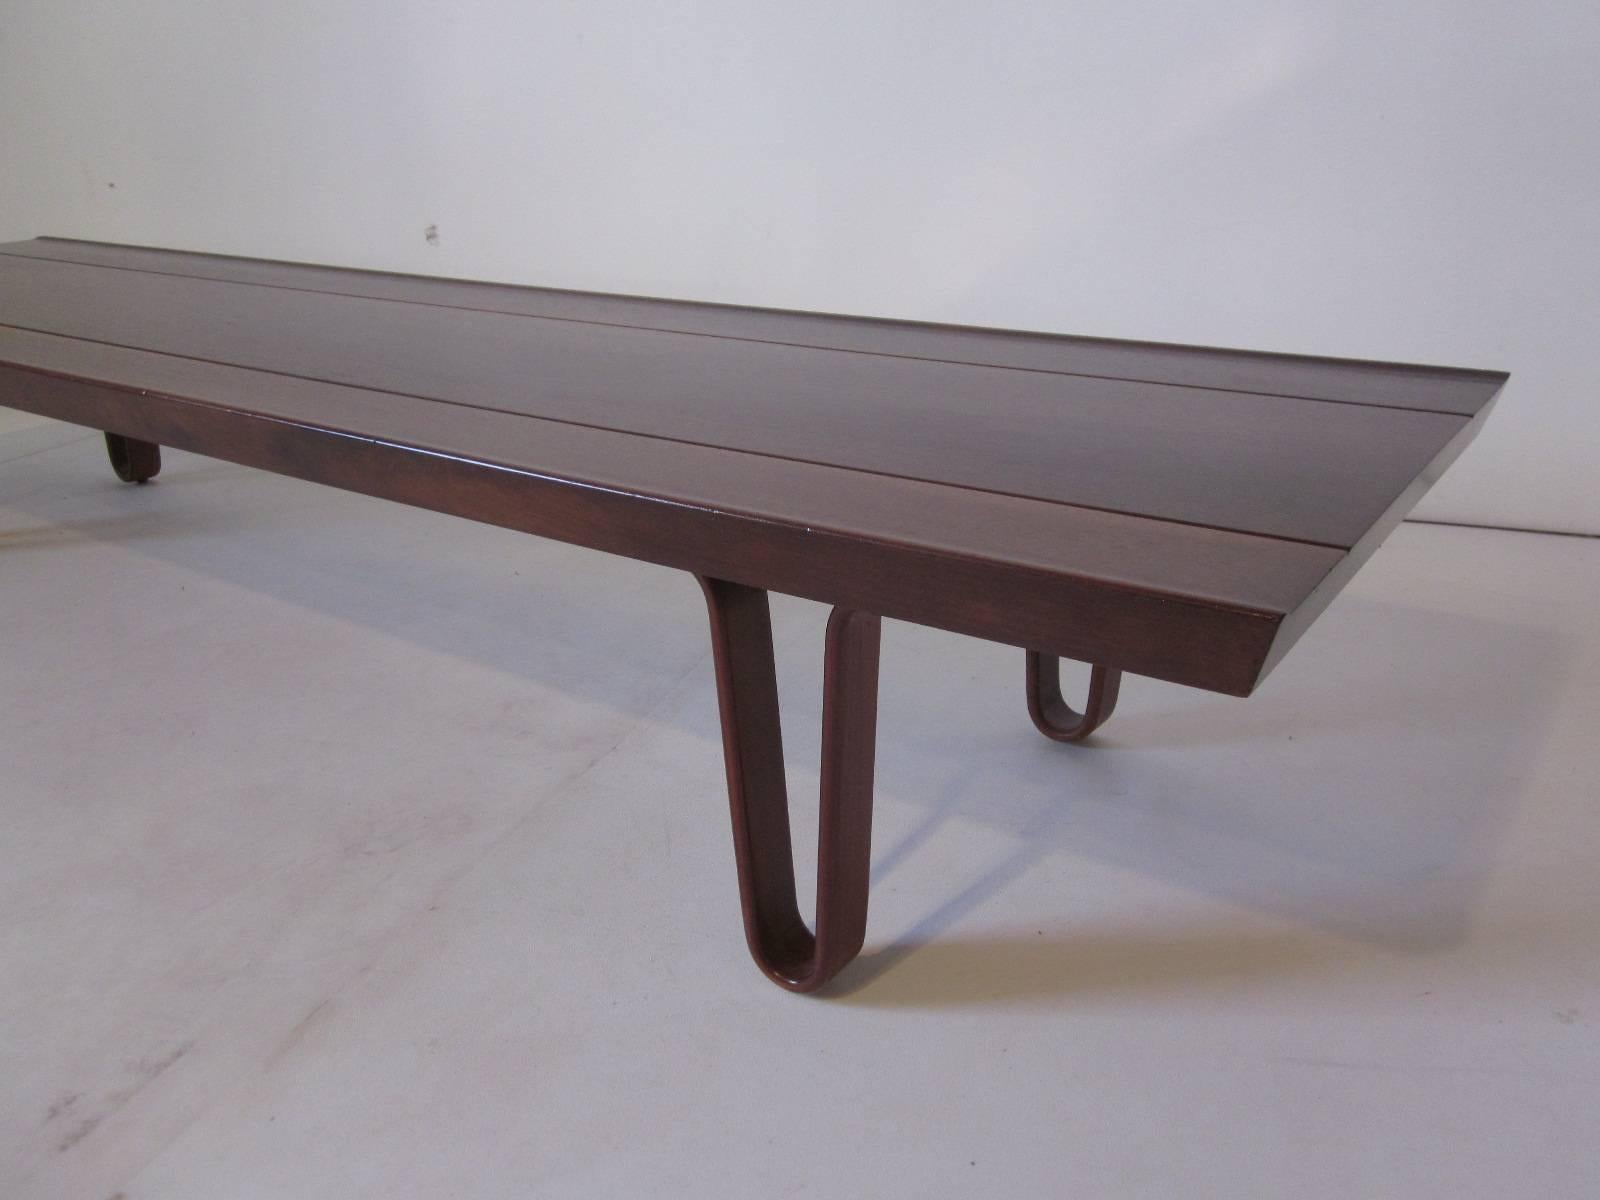 A well grained medium mahogany Long John coffee table or bench with sculptural bentwood legs and grooved detail lines to the top. Retains the early green metal manufactures label, Dunbar Furniture Company Bern Indiana.